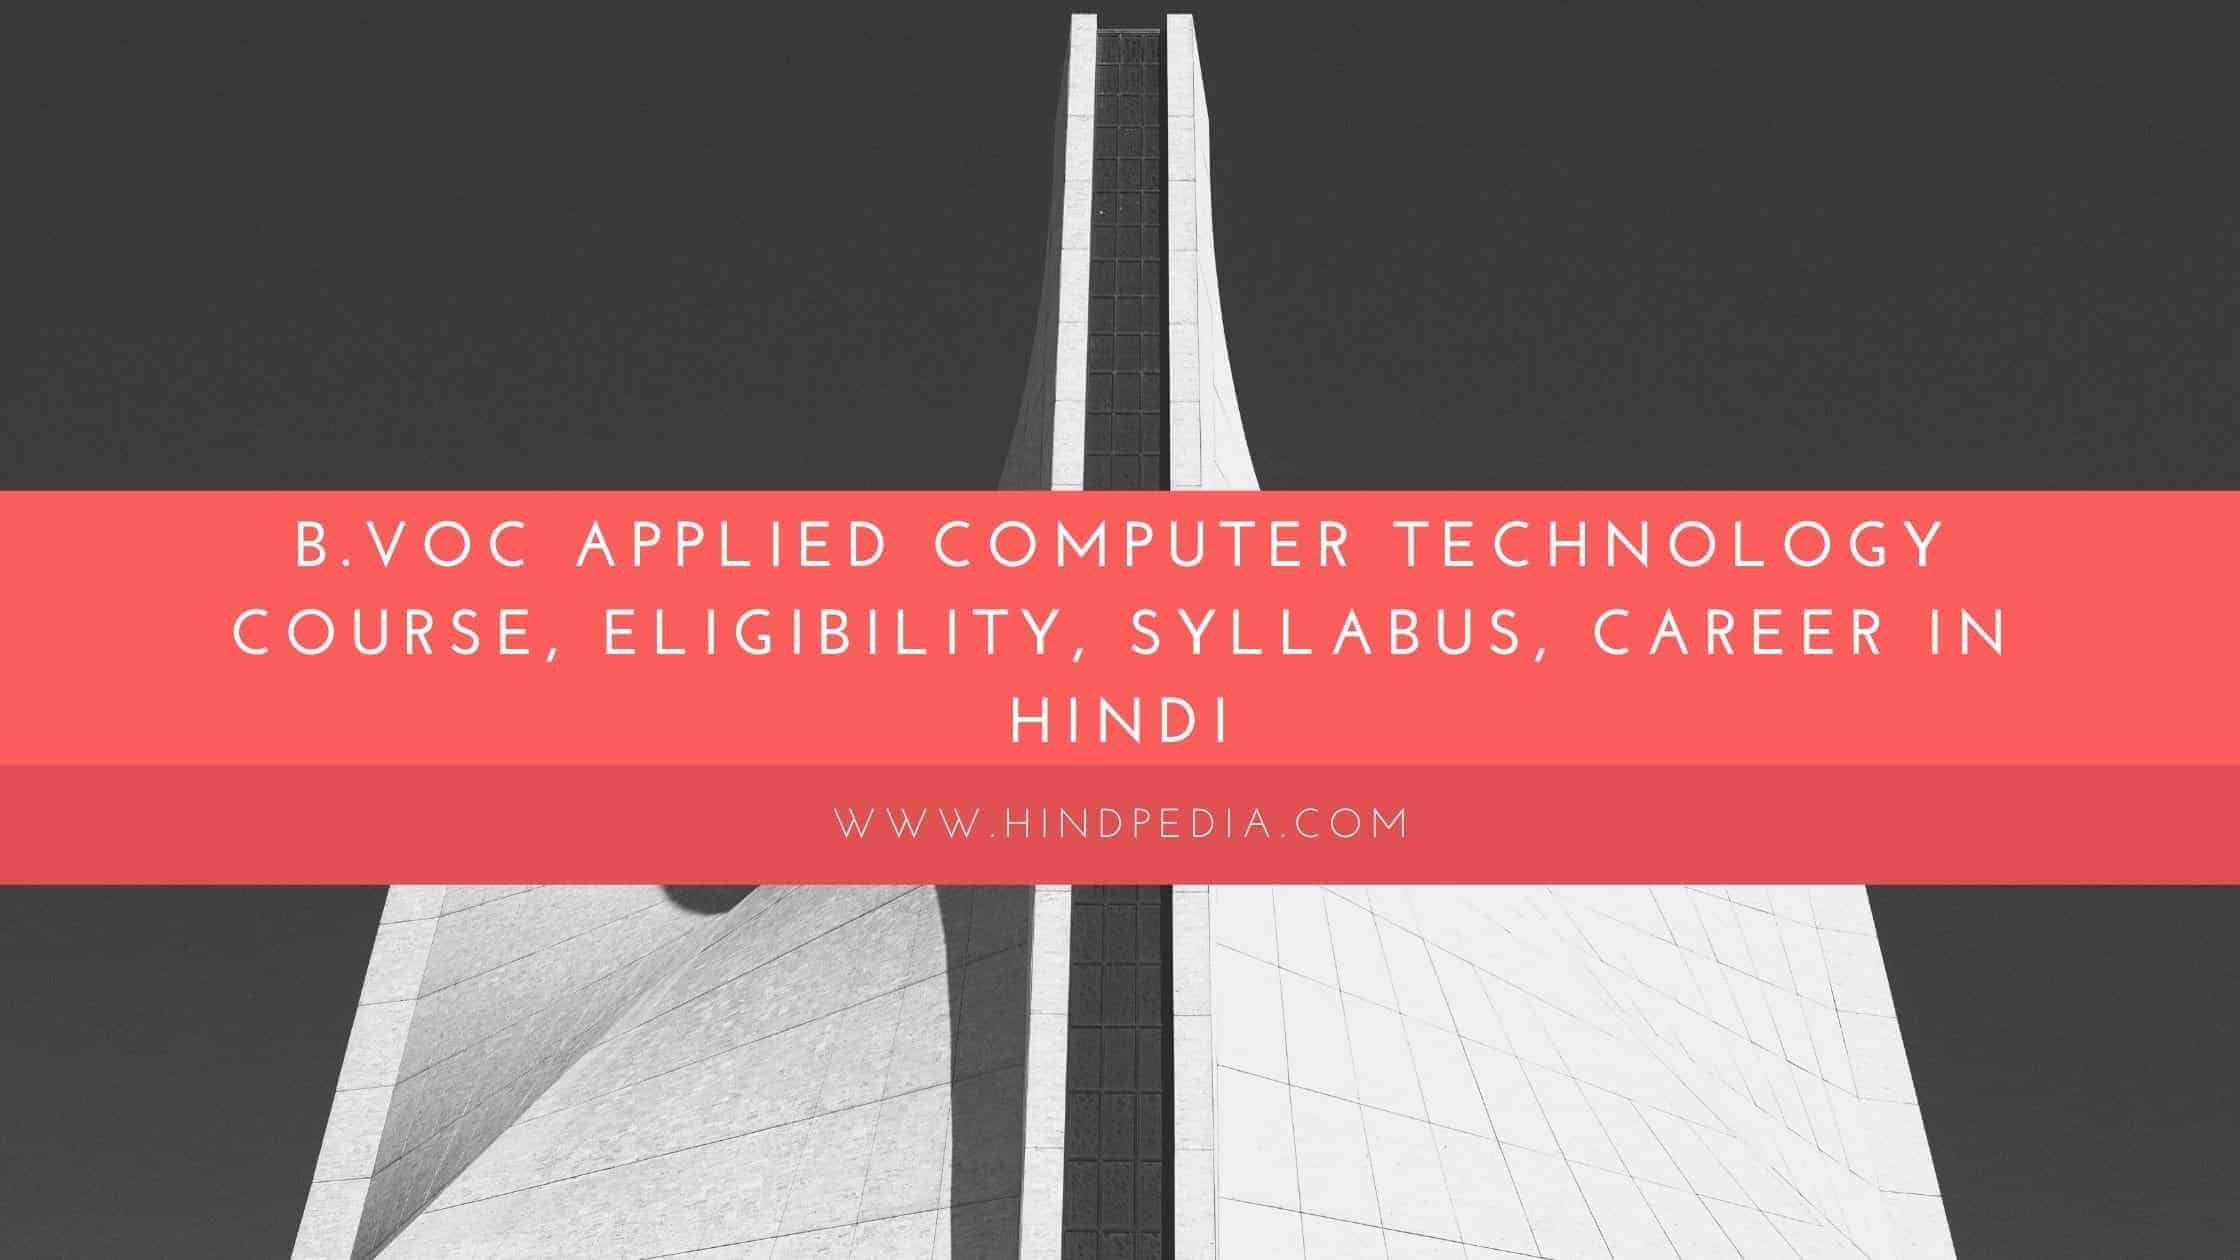 B.Voc Applied Computer Technology course, Eligibility, Syllabus, Career in Hindi